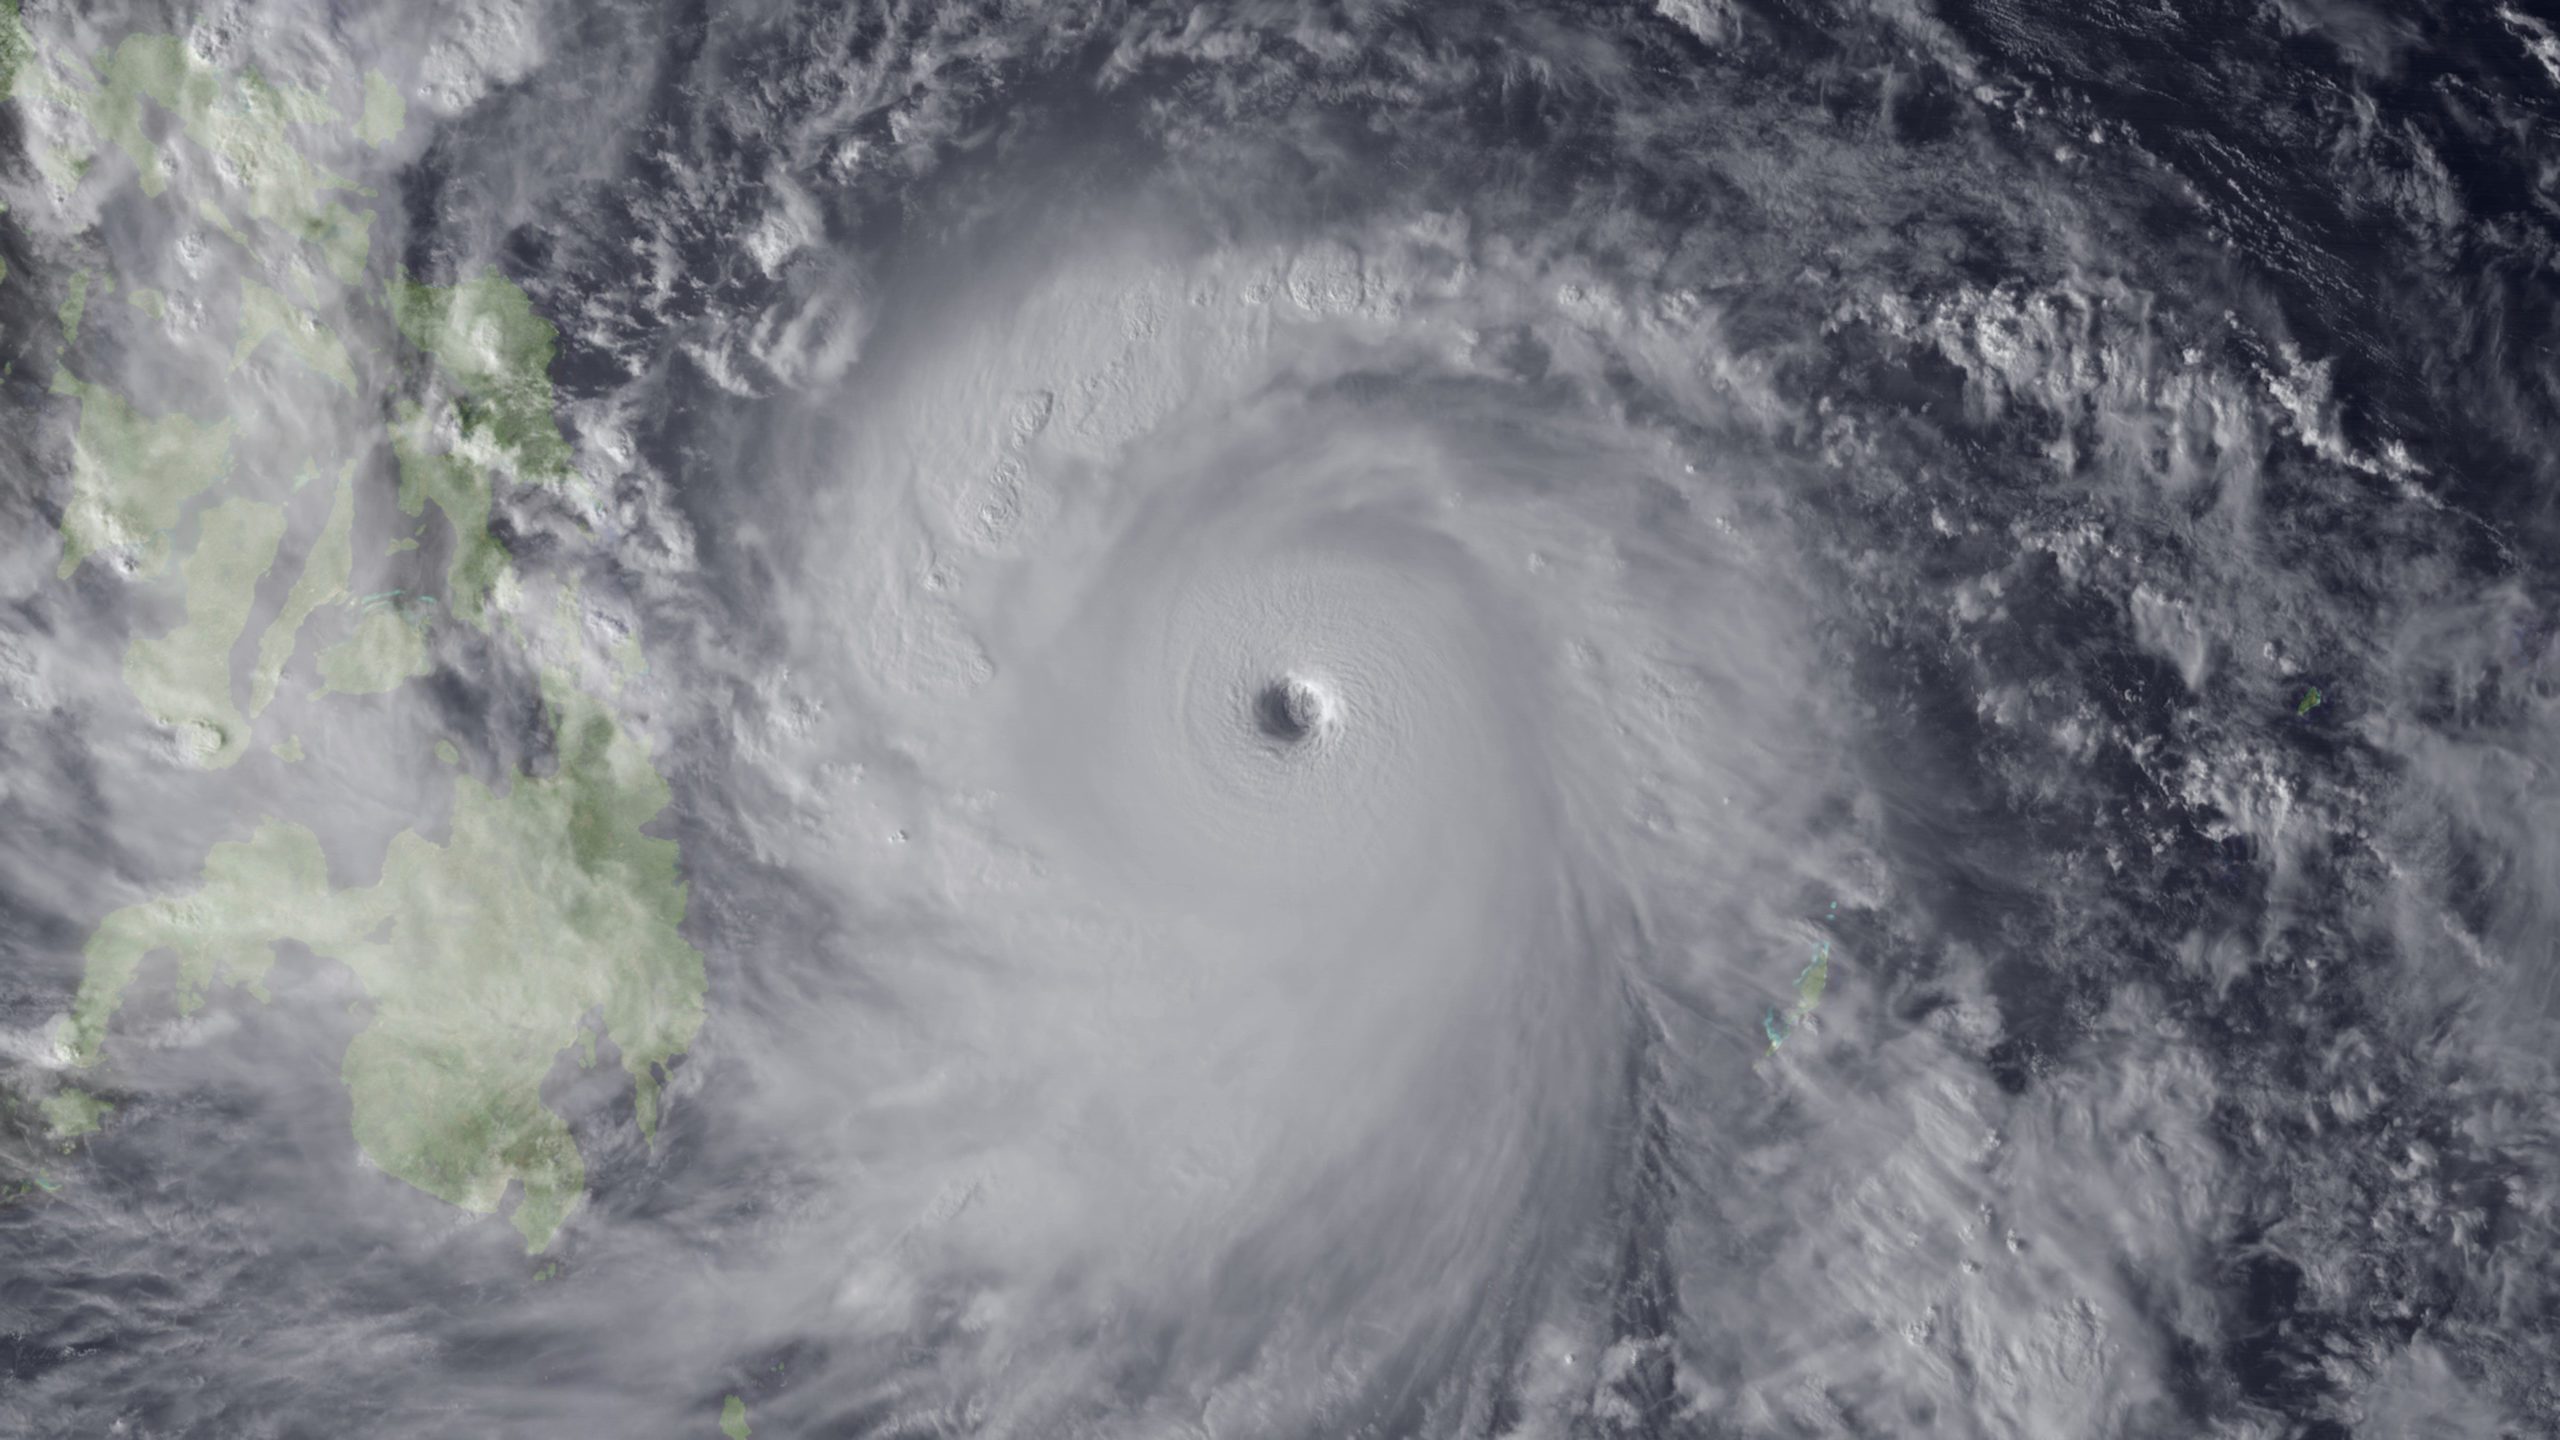 Super Typhoon Haiyan is seen approaching the Philippines in this Japan